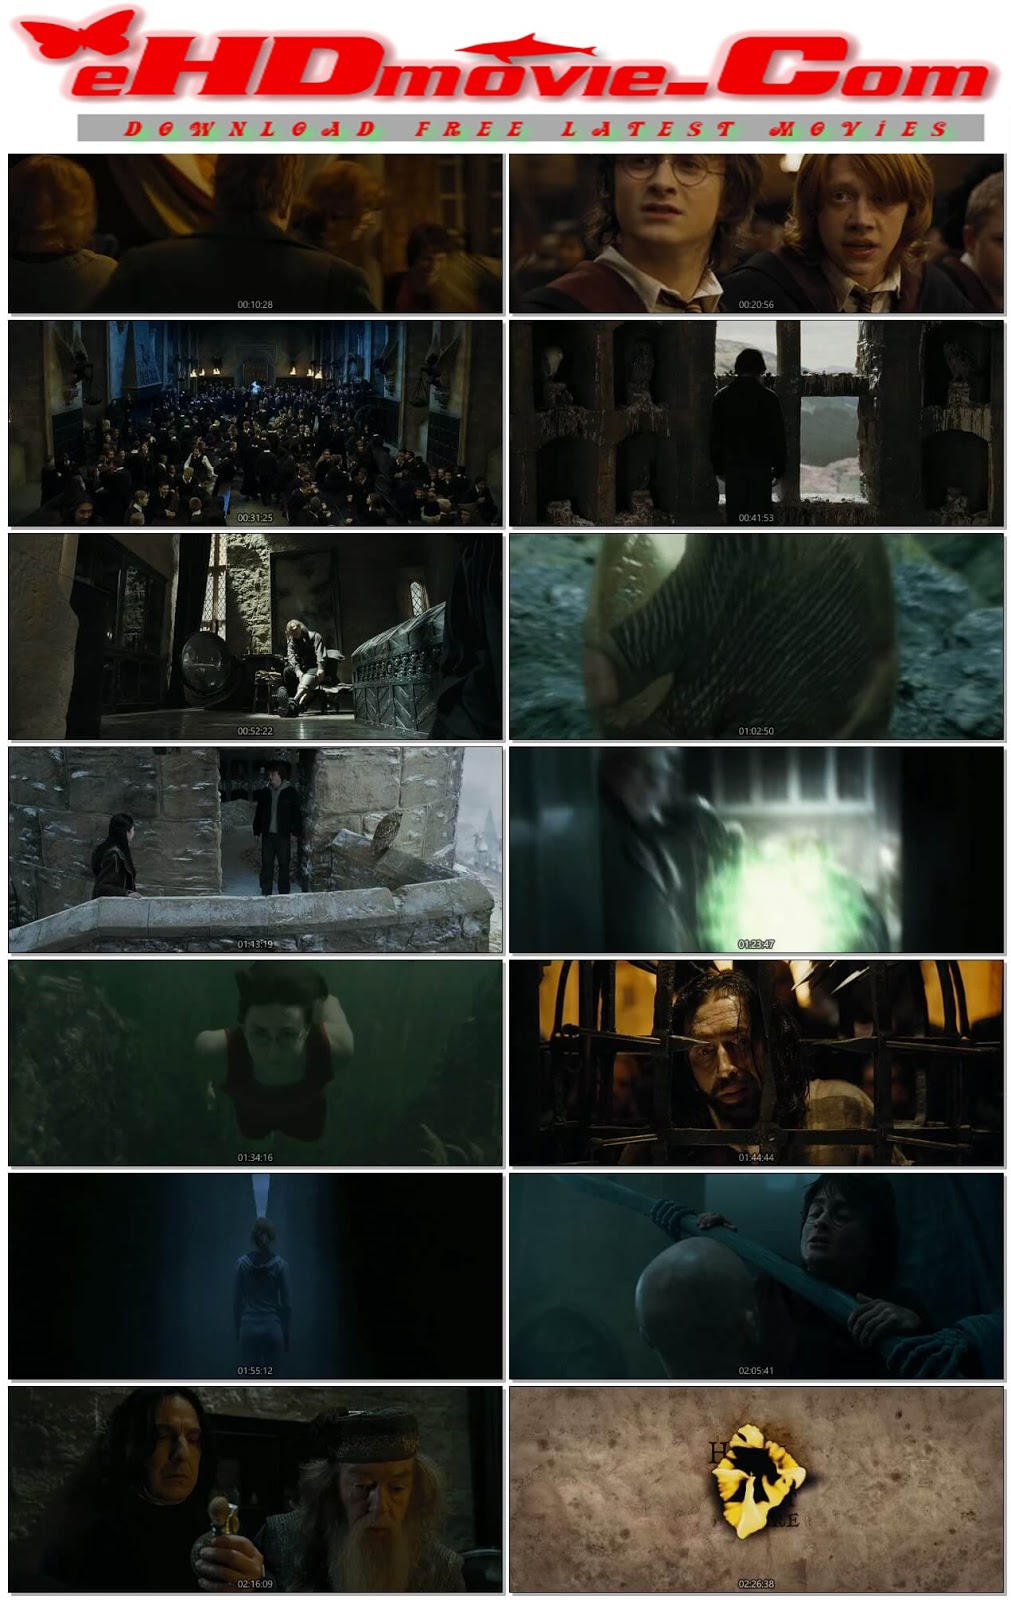 Harry Potter and the Chamber of Secrets download the last version for apple